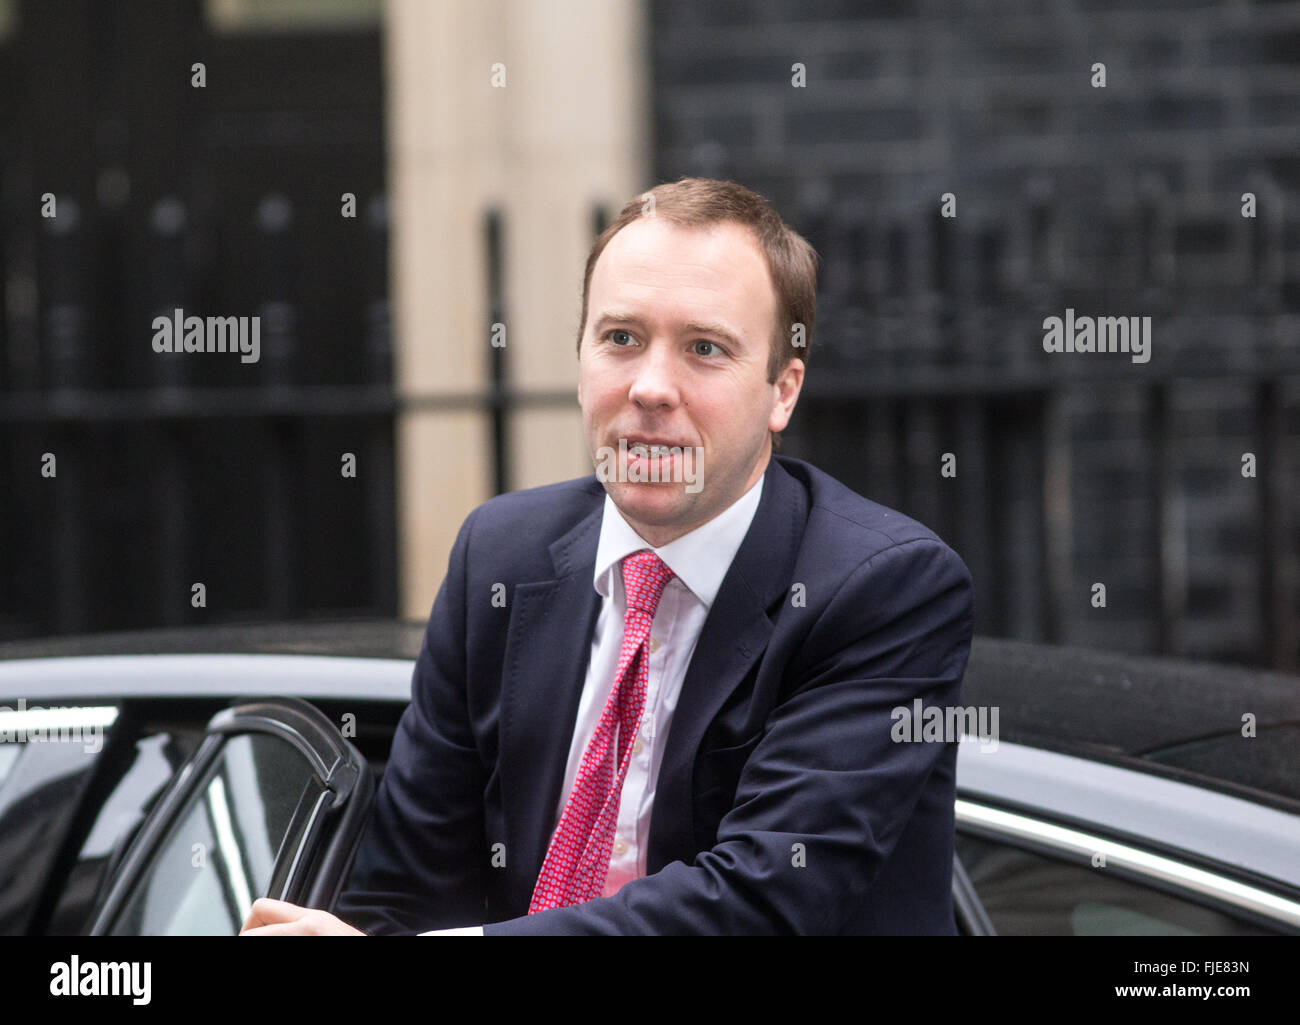 Matthew Hancock,Minister for the Cabinet office and Paymaster General,arrives at number 10 Downing Street for a cabinet meeting Stock Photo